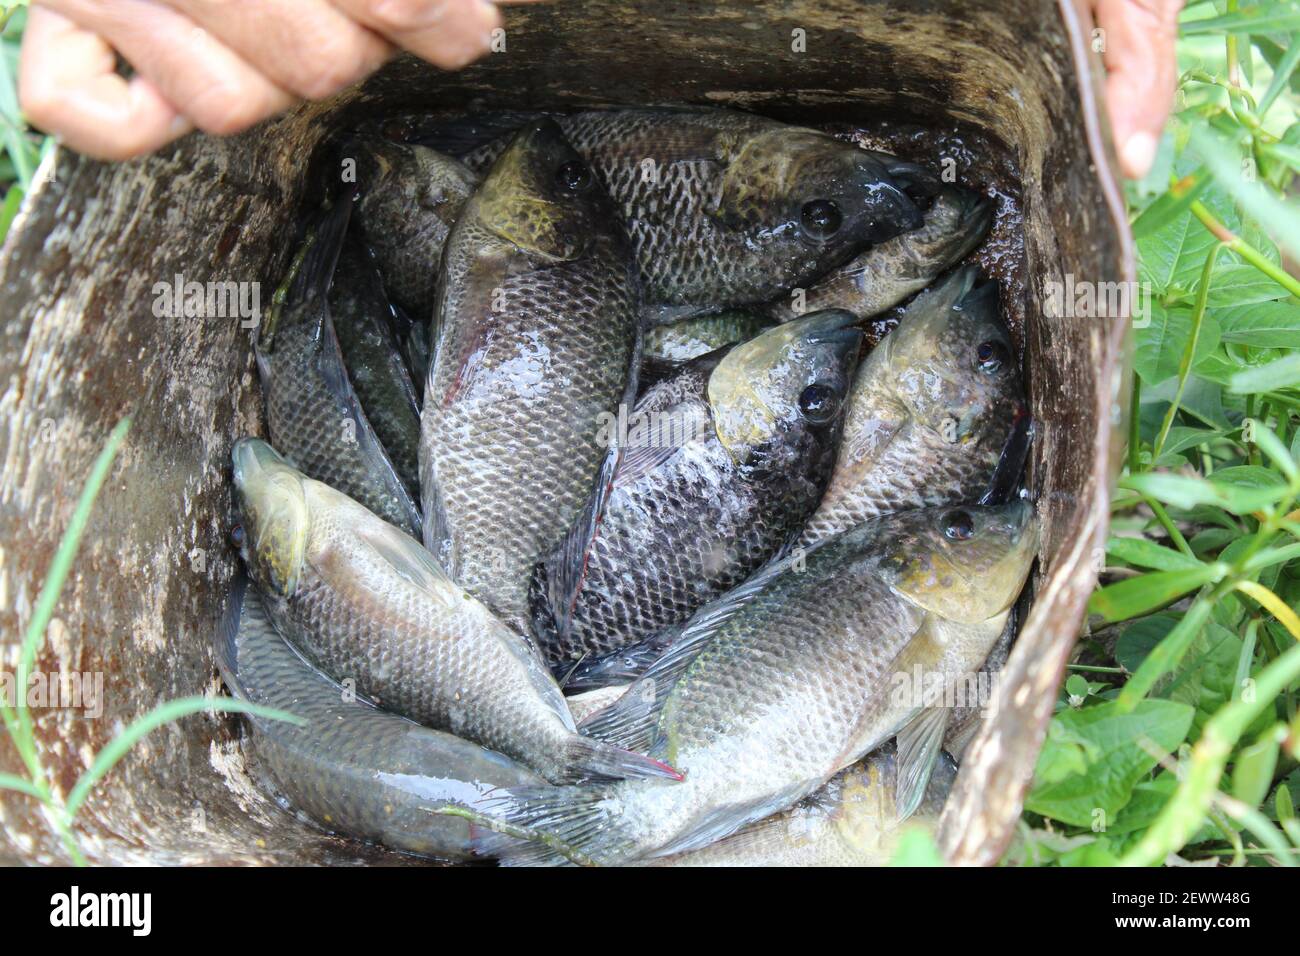 Tilapia fish catching from pond Stock Photo